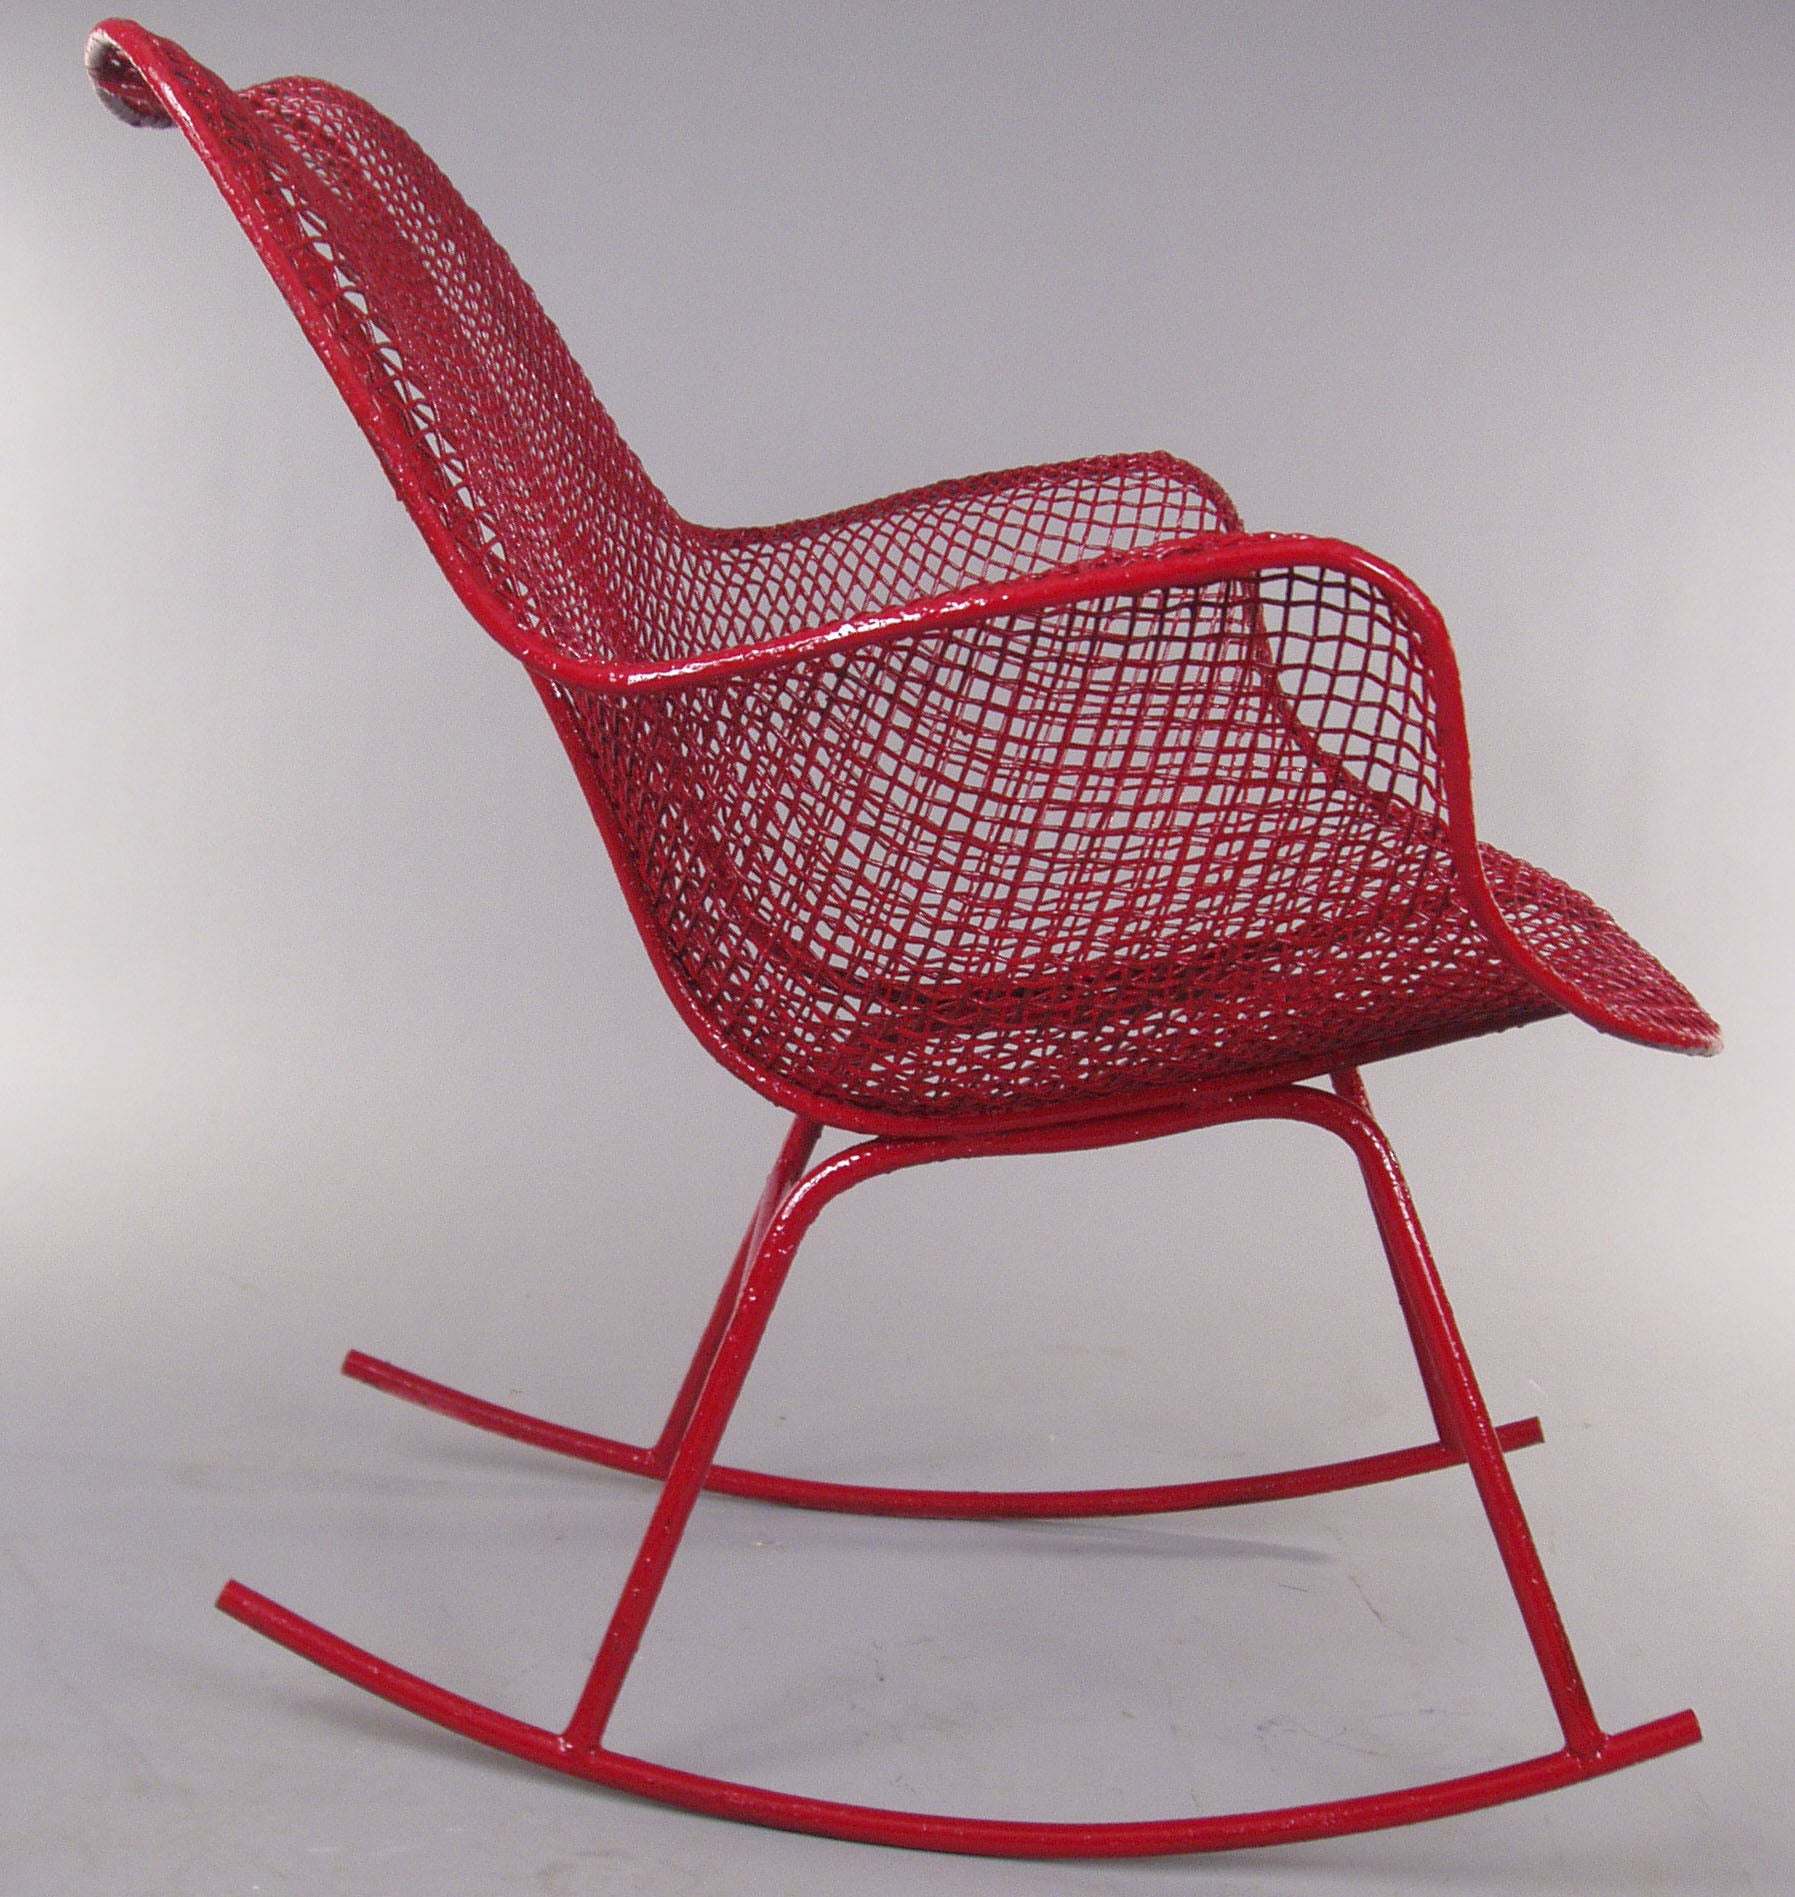 The Sculptura Rocking Chair by Russell Woodard